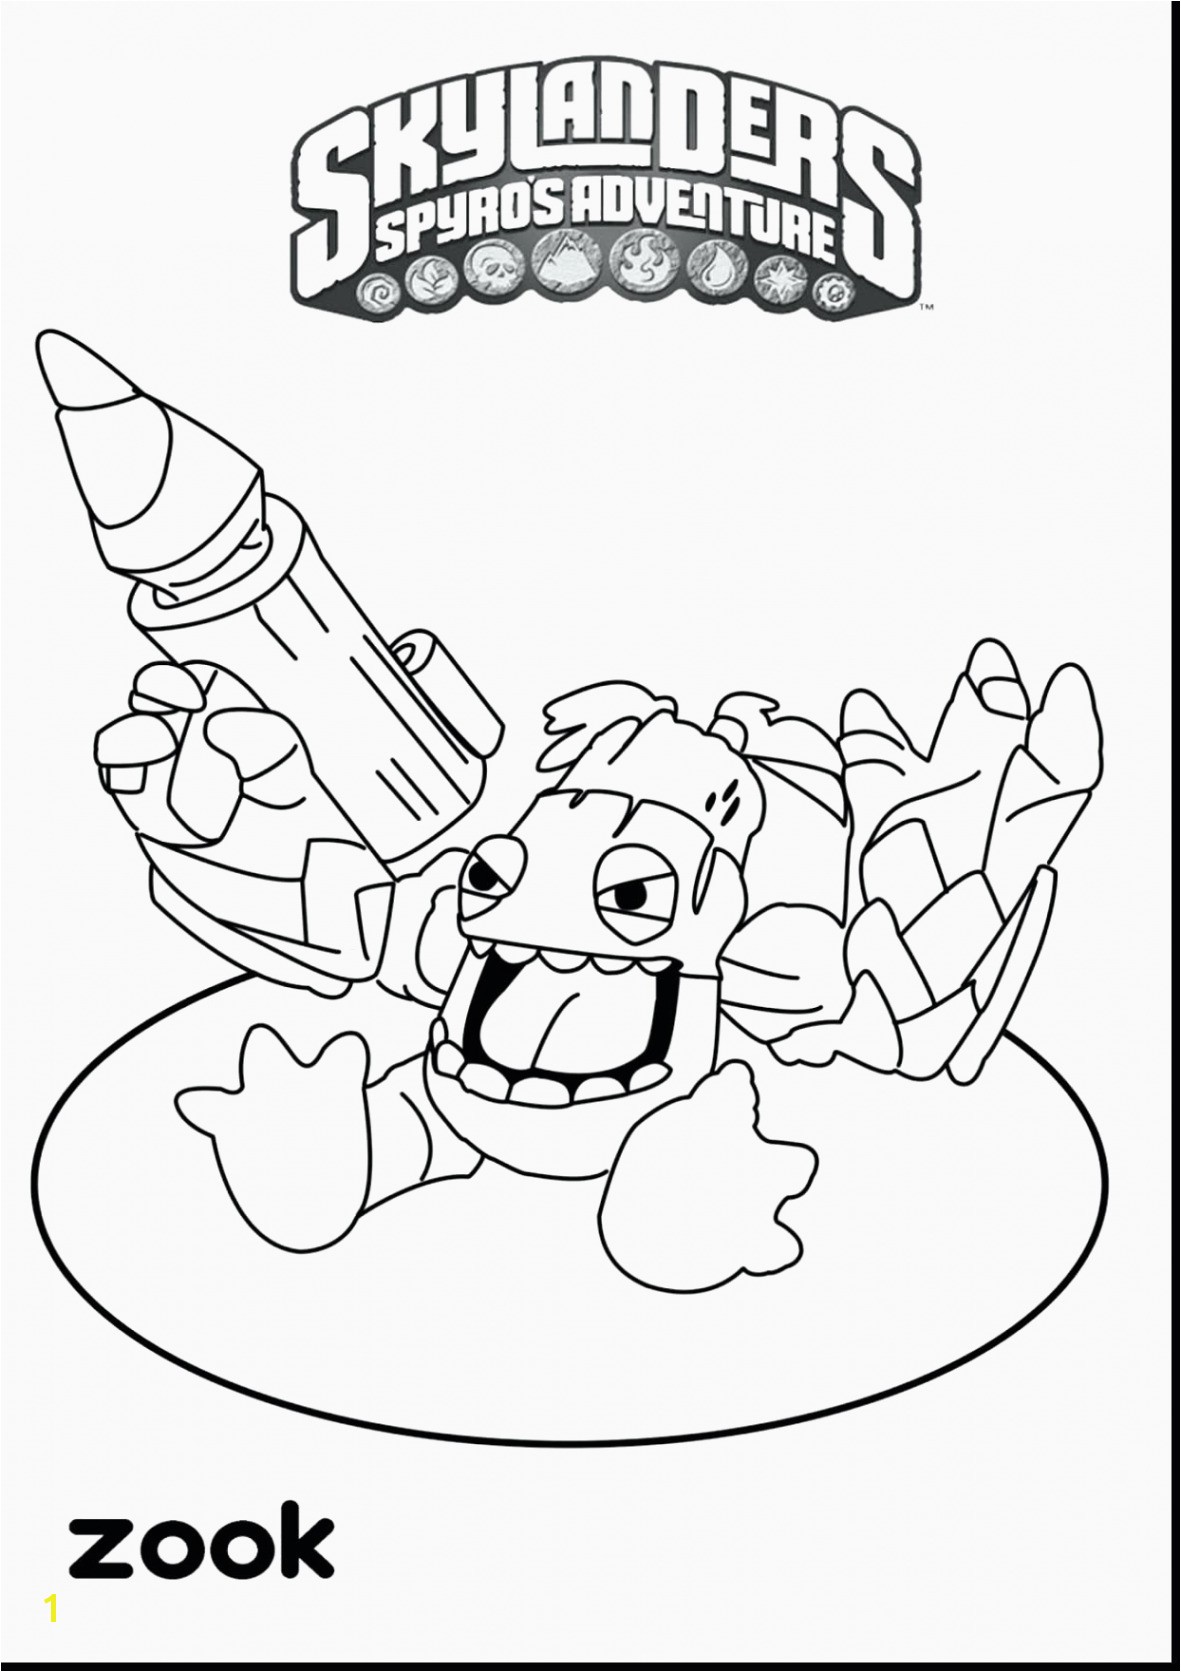 Kickball Coloring Pages Kickball Coloring Pages Awesome Free Christmas Coloring Pages